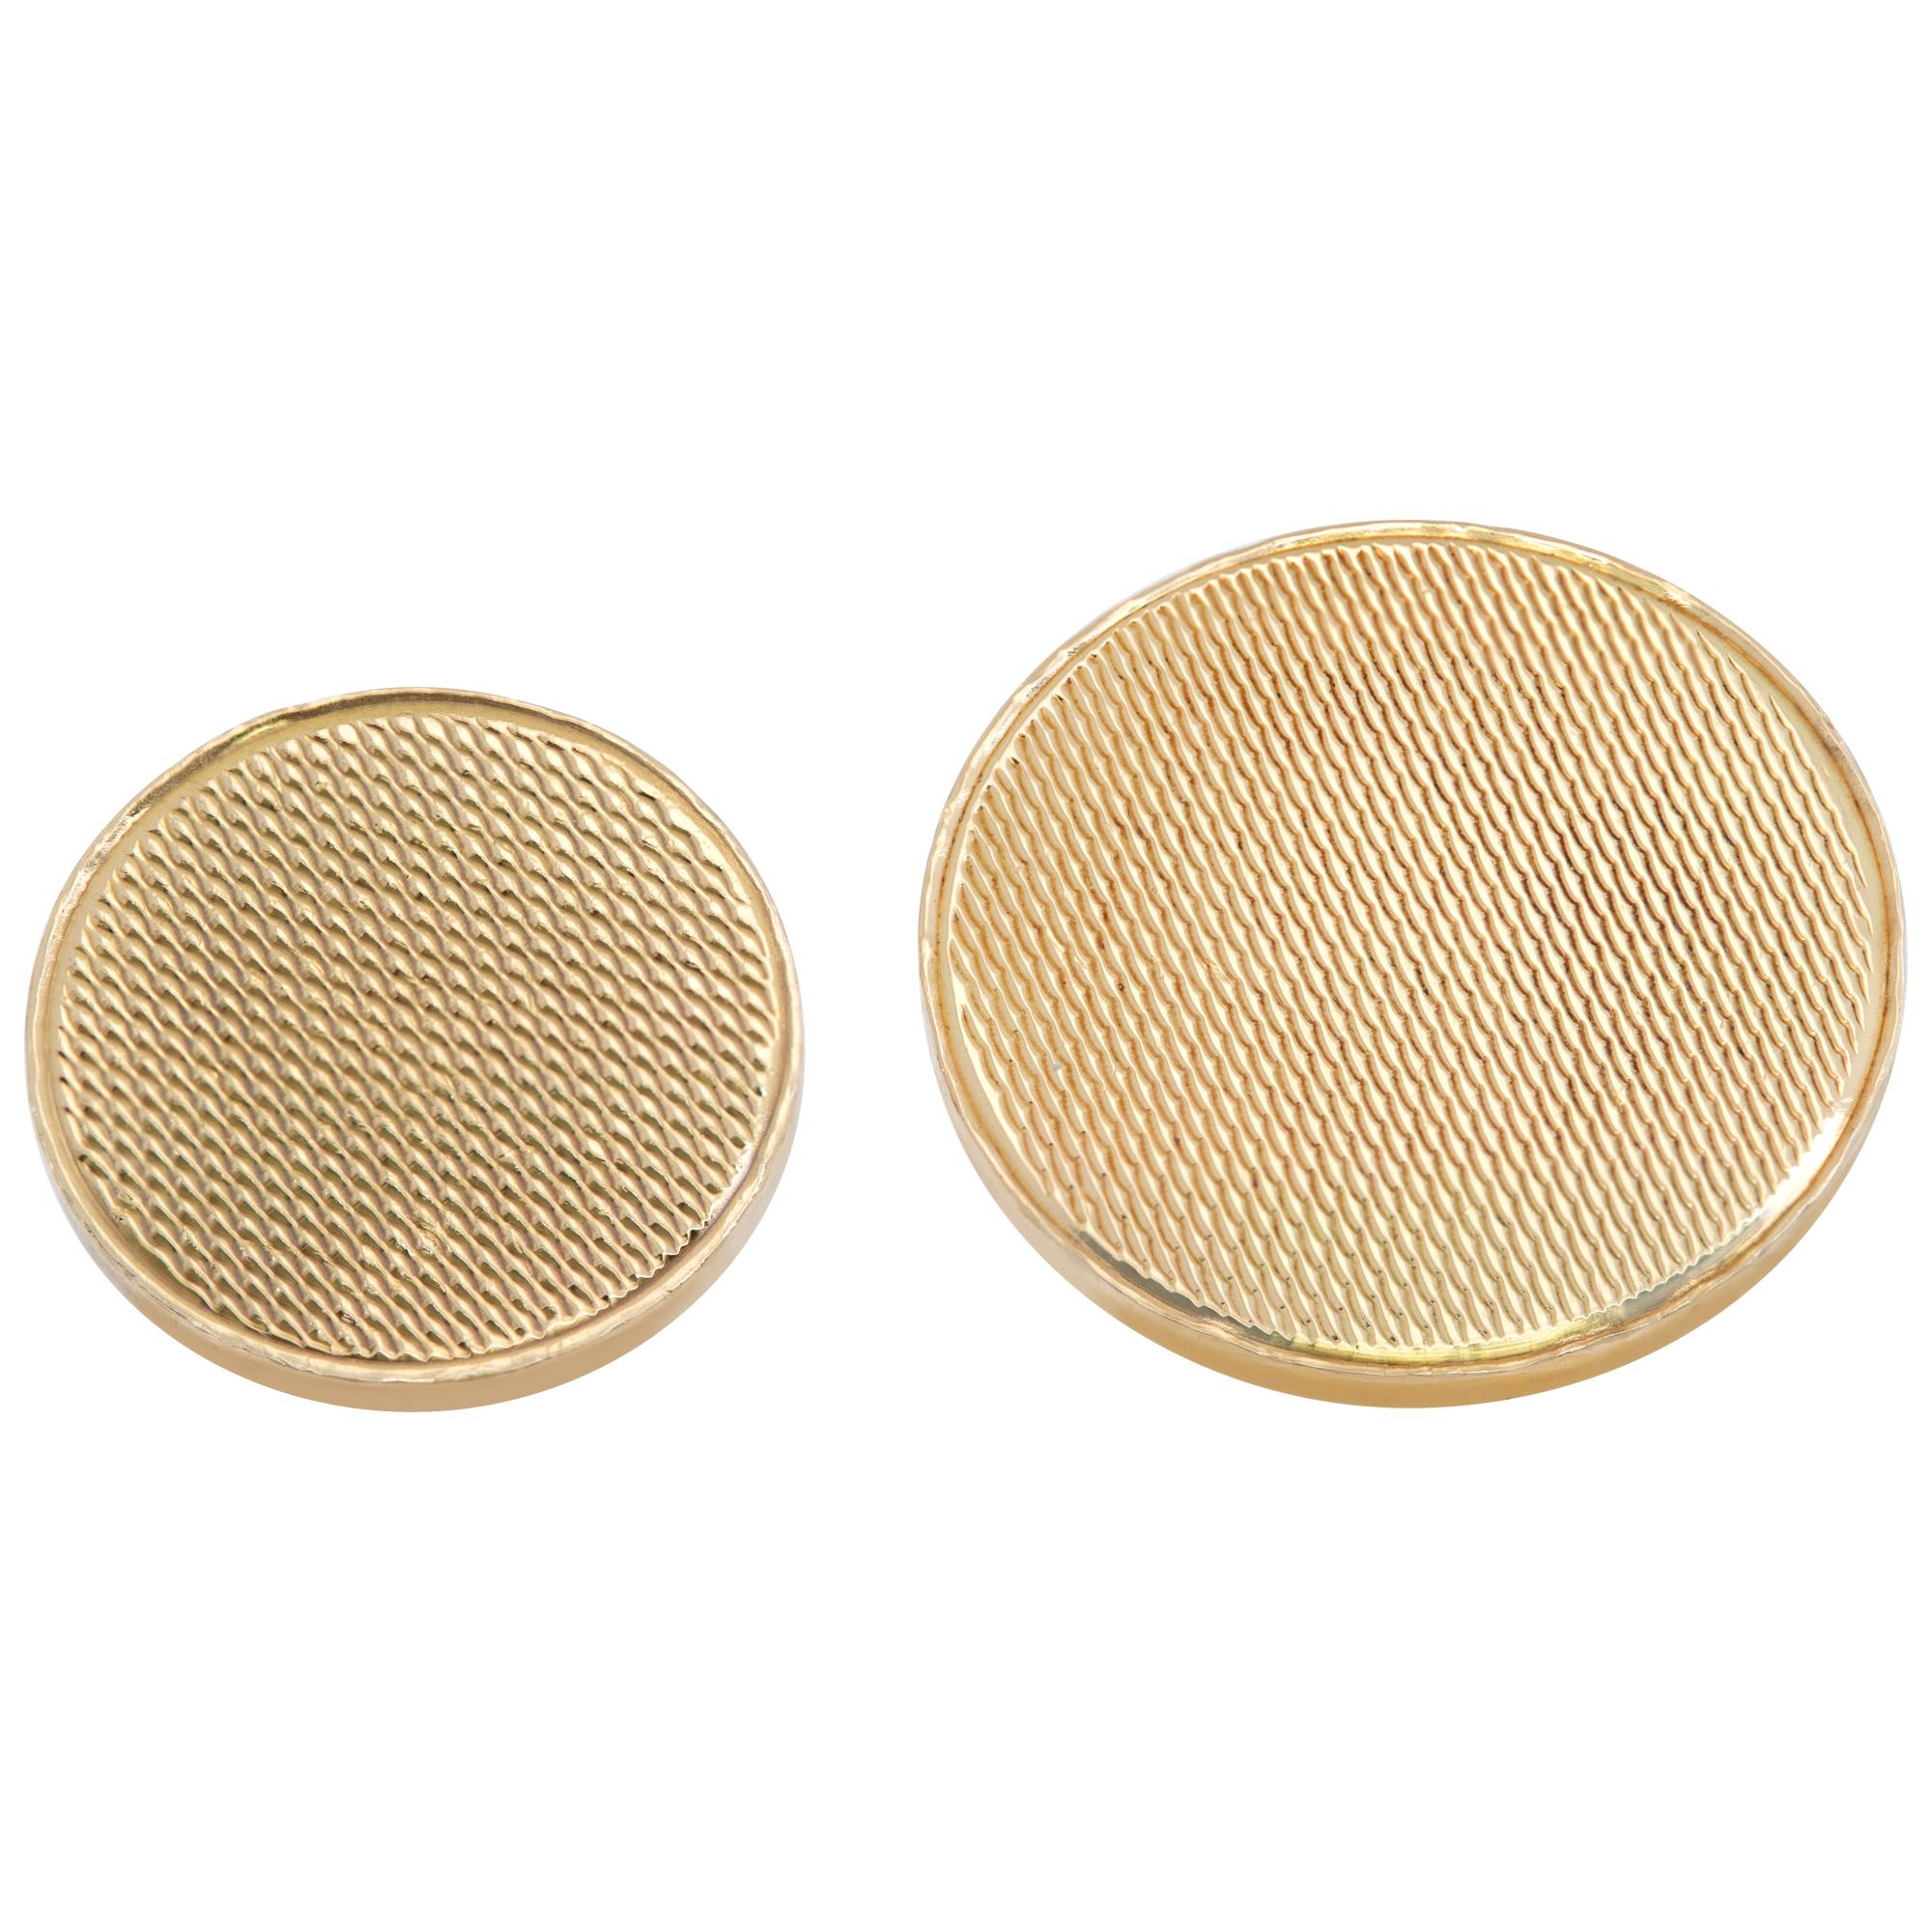 Asprey London 18k yellow gold blazer buttons In Excellent Condition For Sale In Surfside, FL